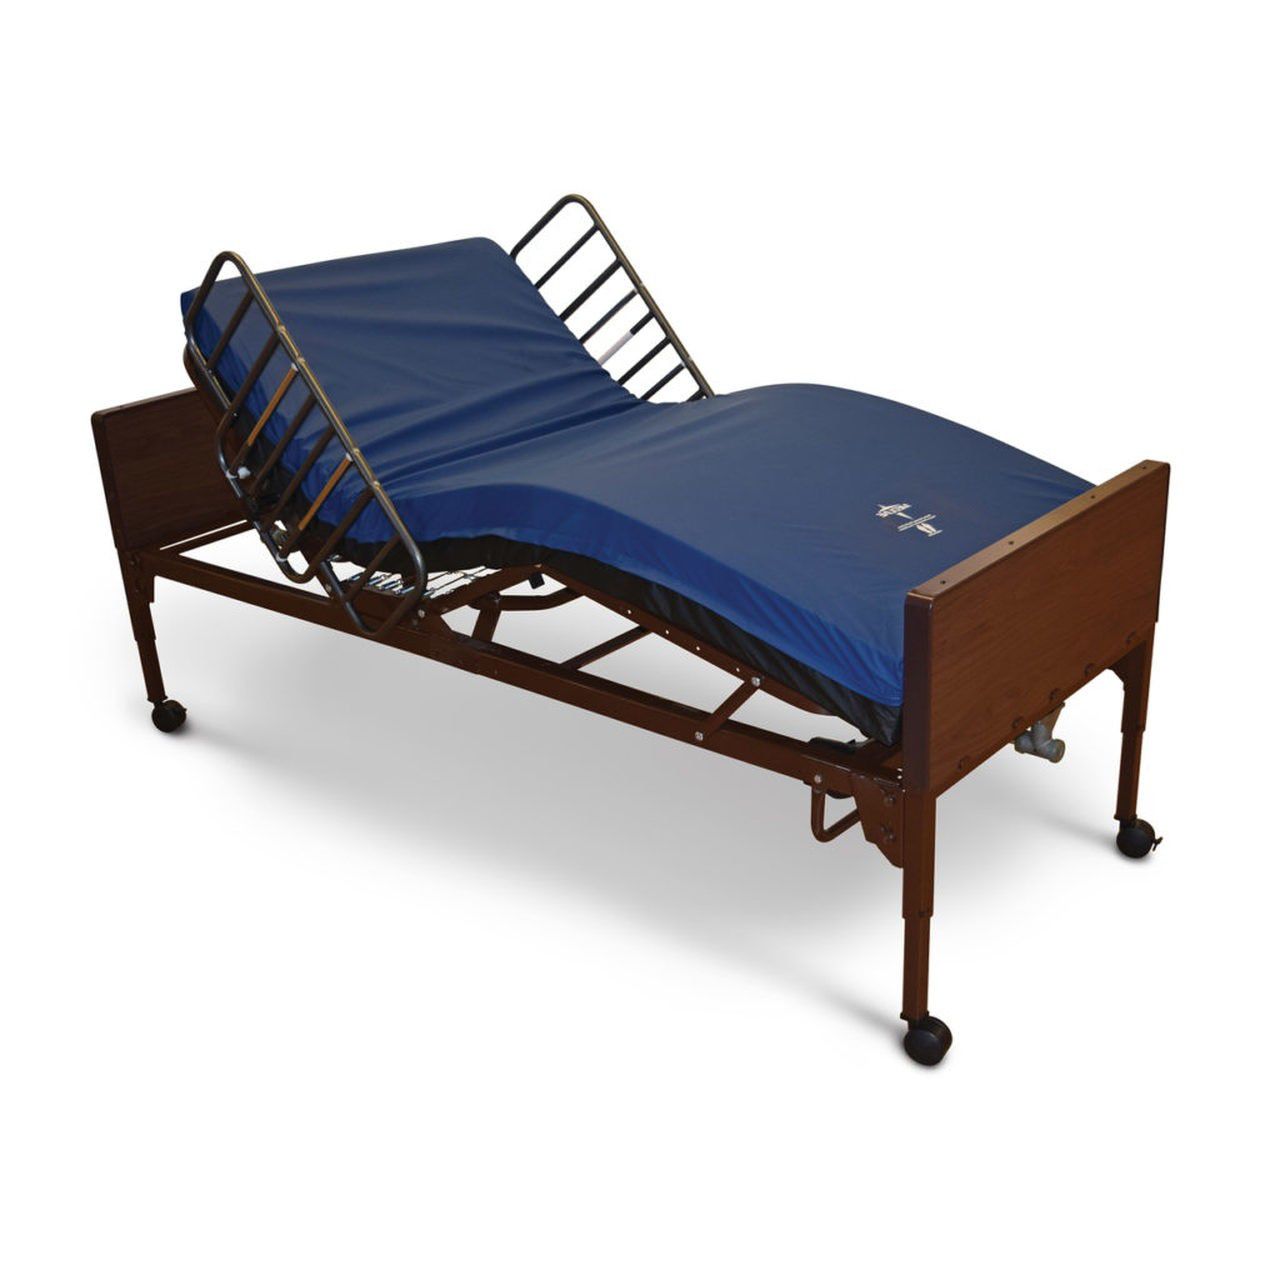 Hospital bed with mattress